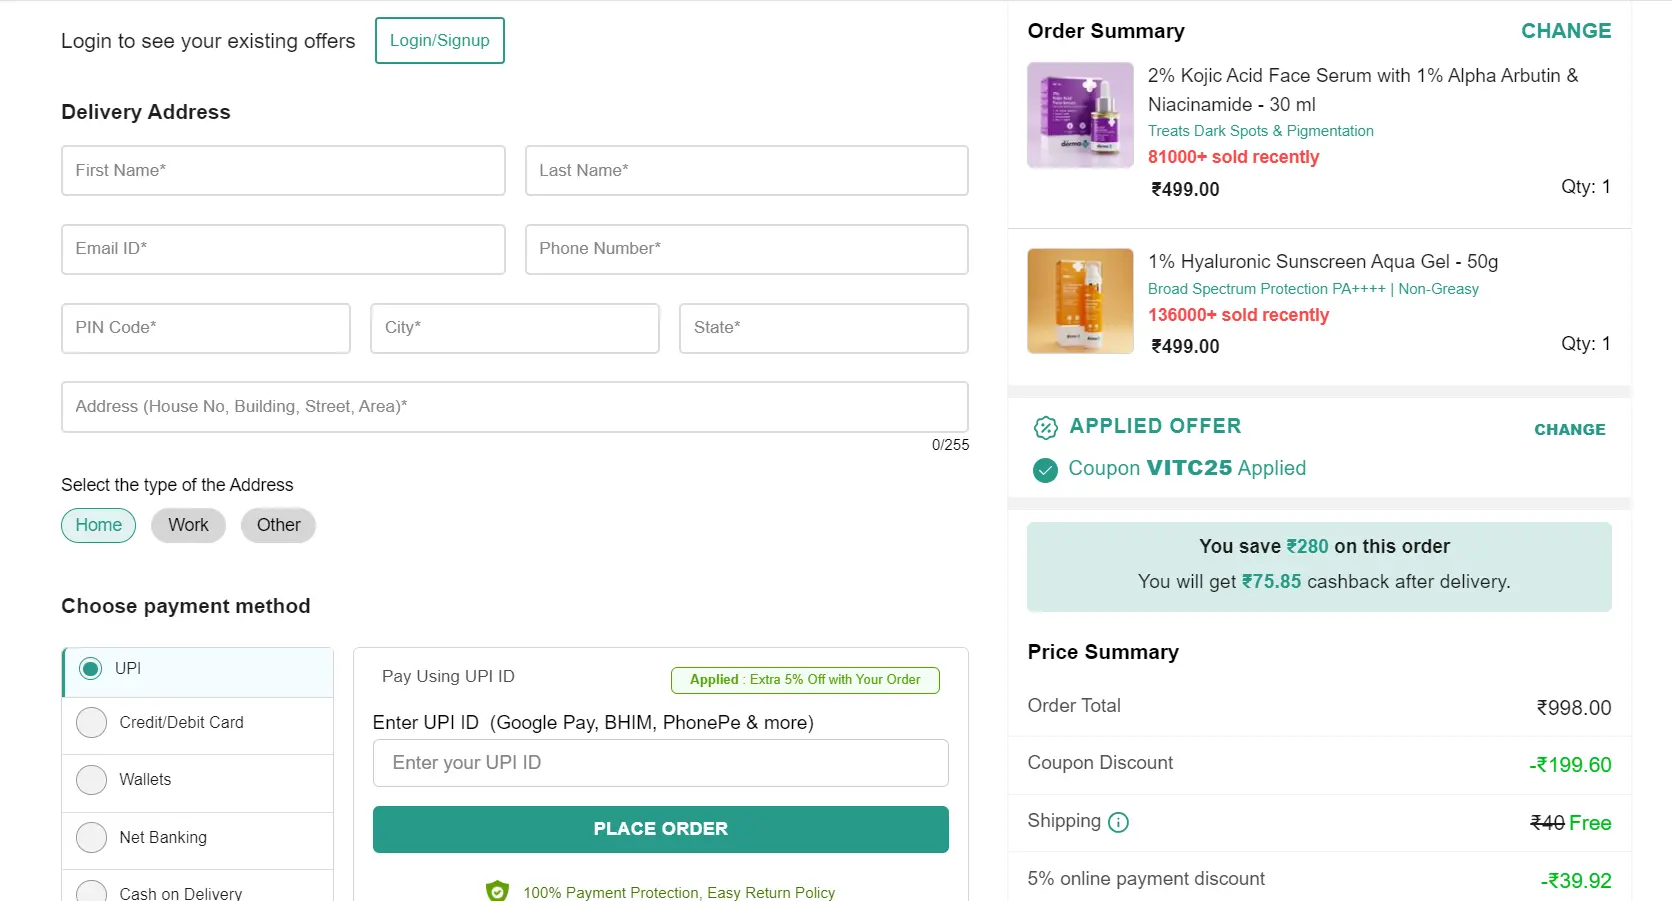 Screenshot of tested coupon for The Derma Co